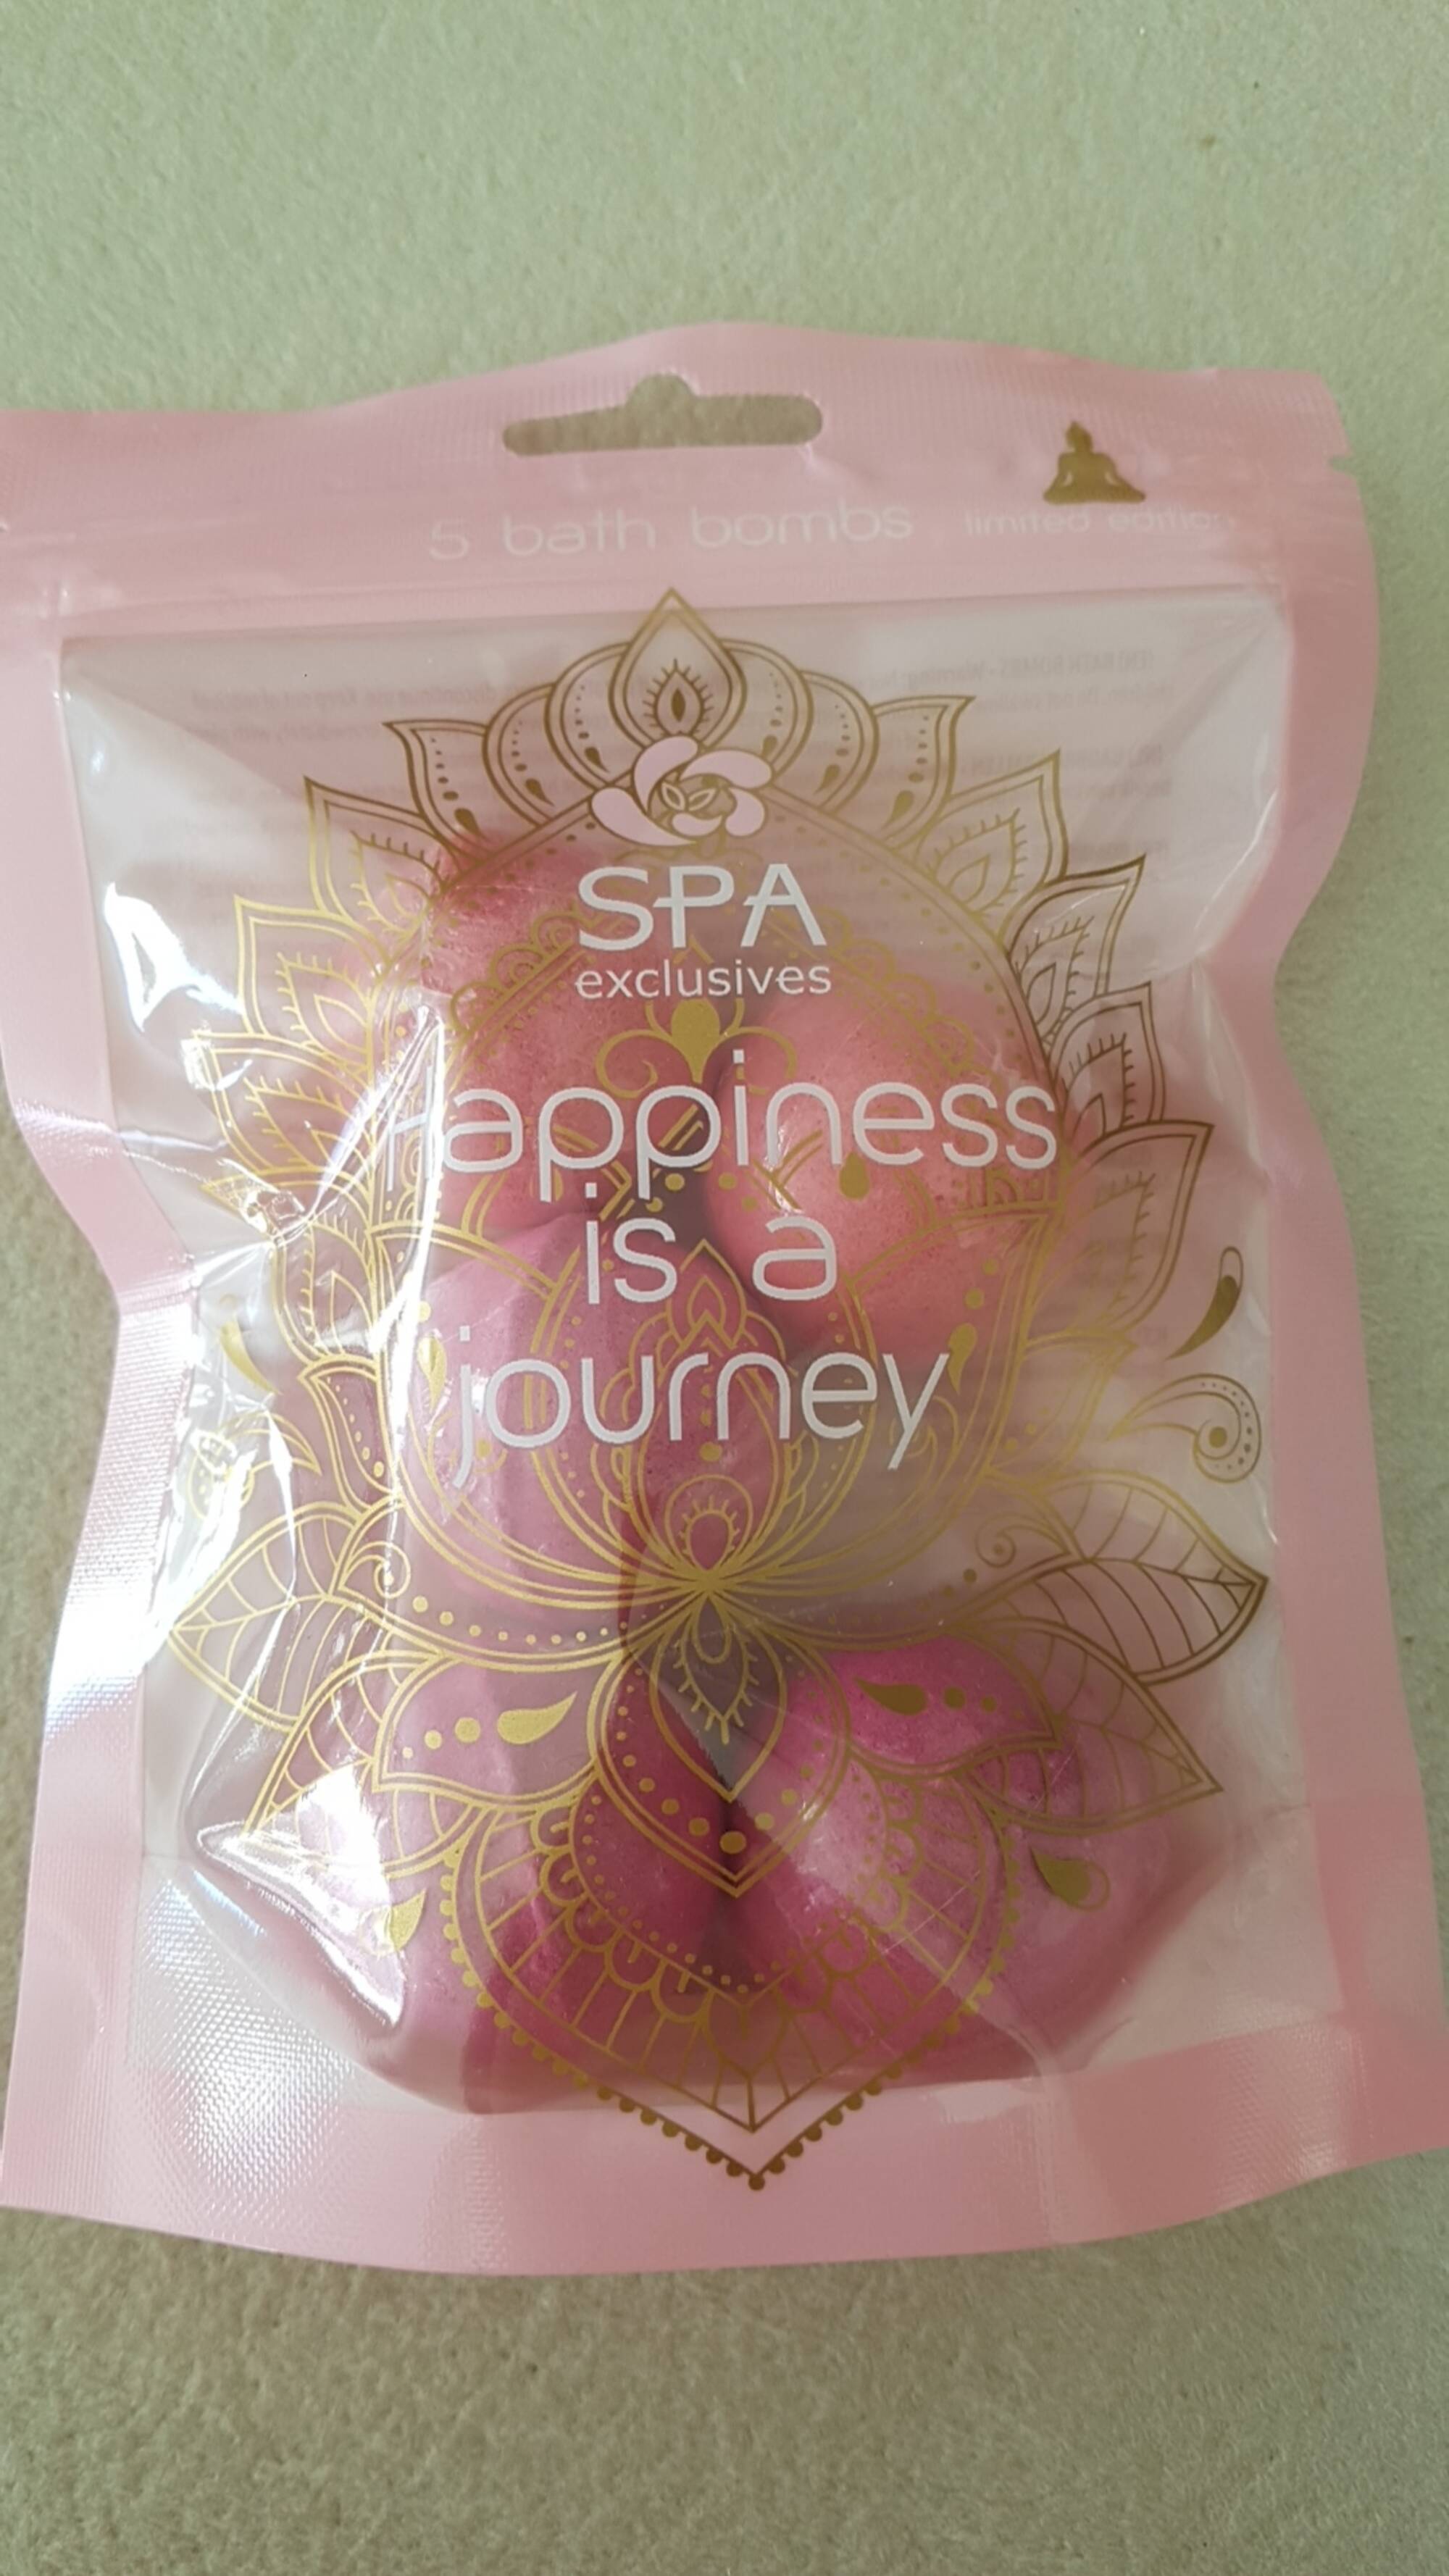 MAXBRANDS - Happiness is a journey - Bath bombs